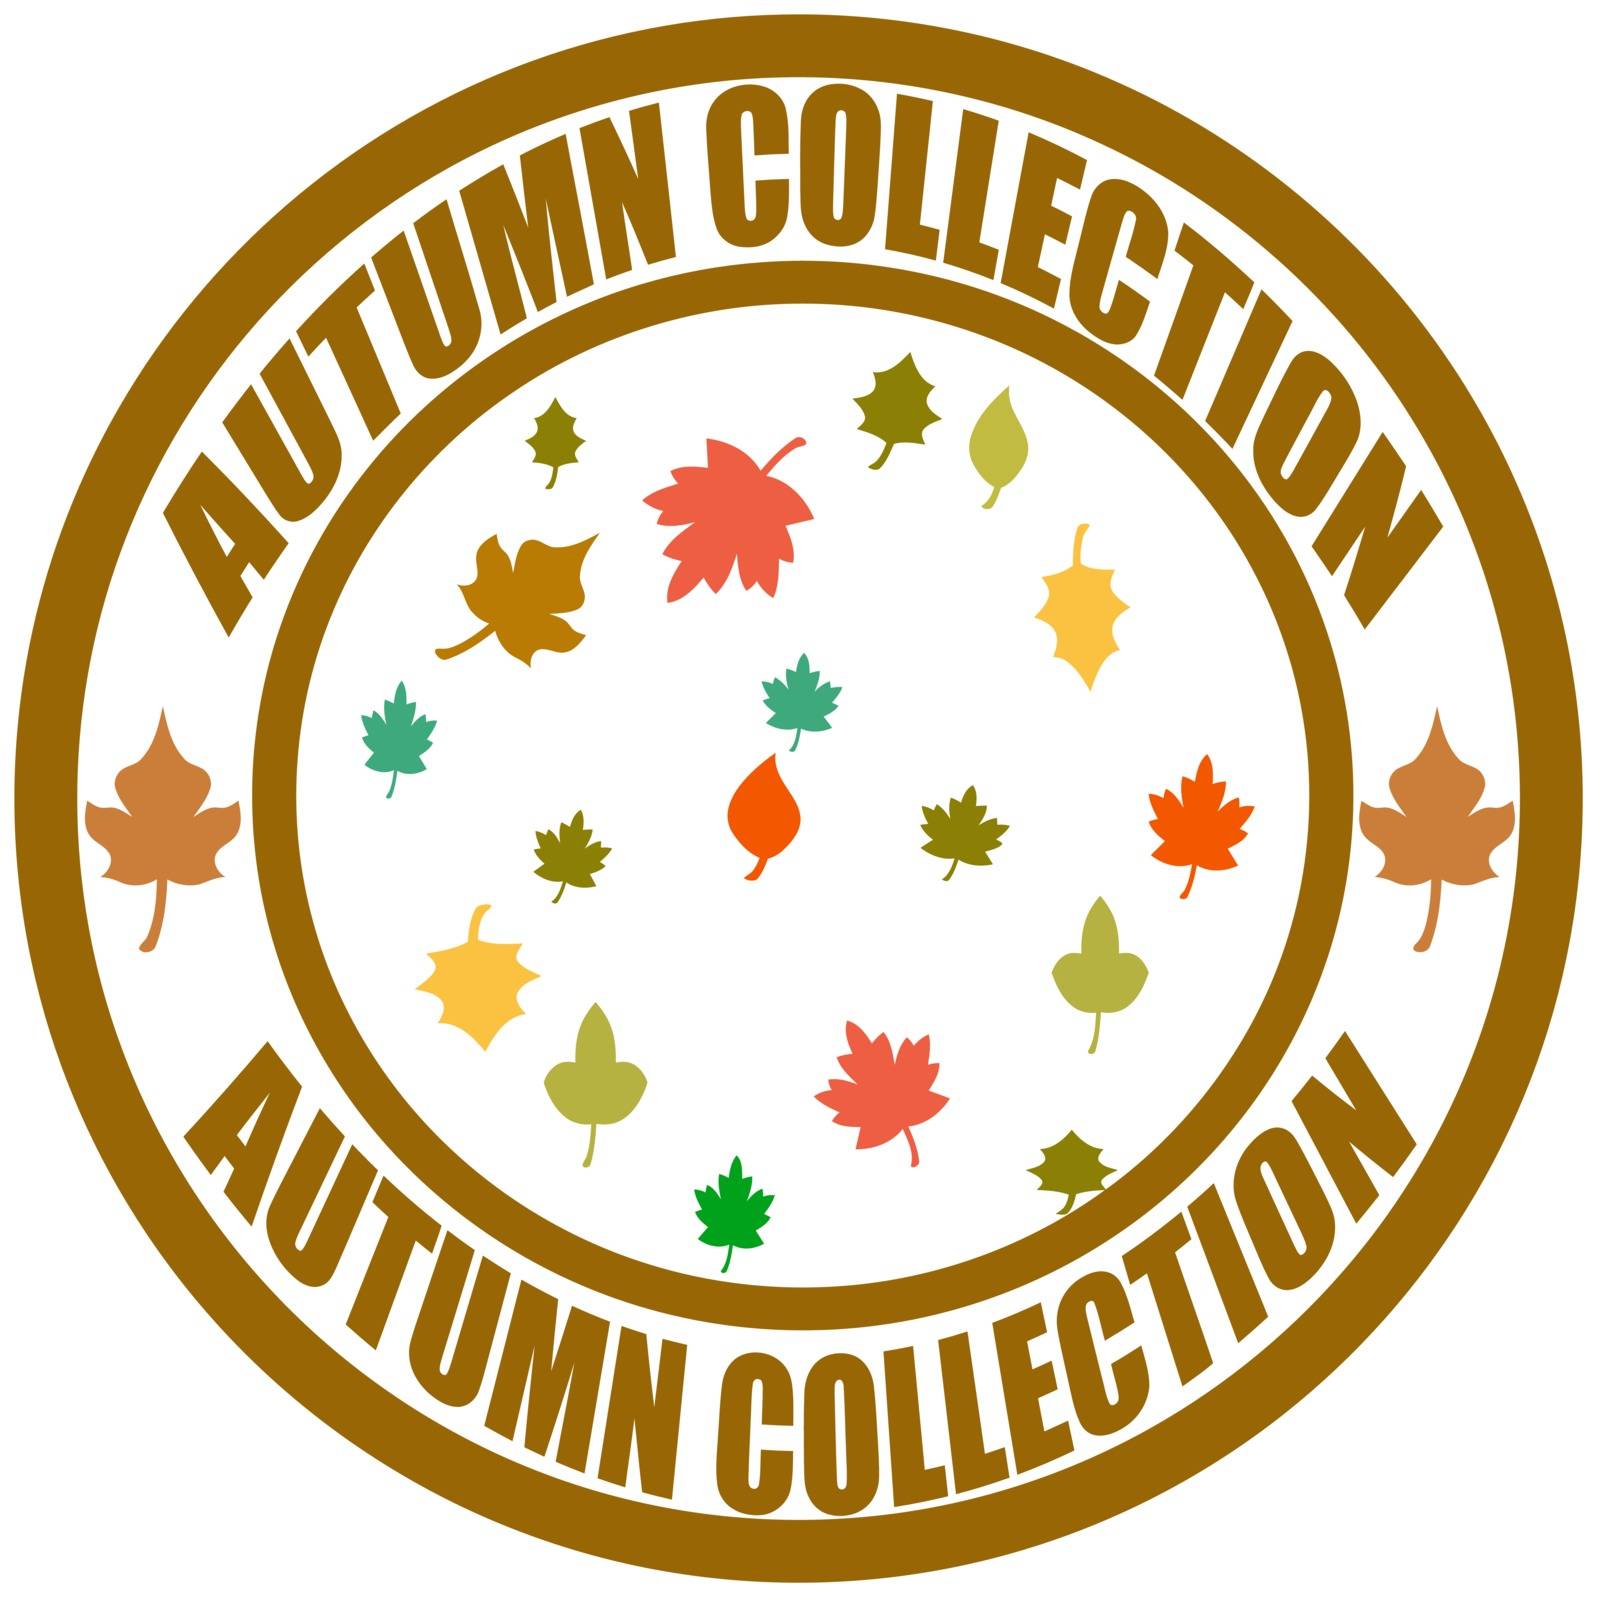 Autumn collection by carmenbobo